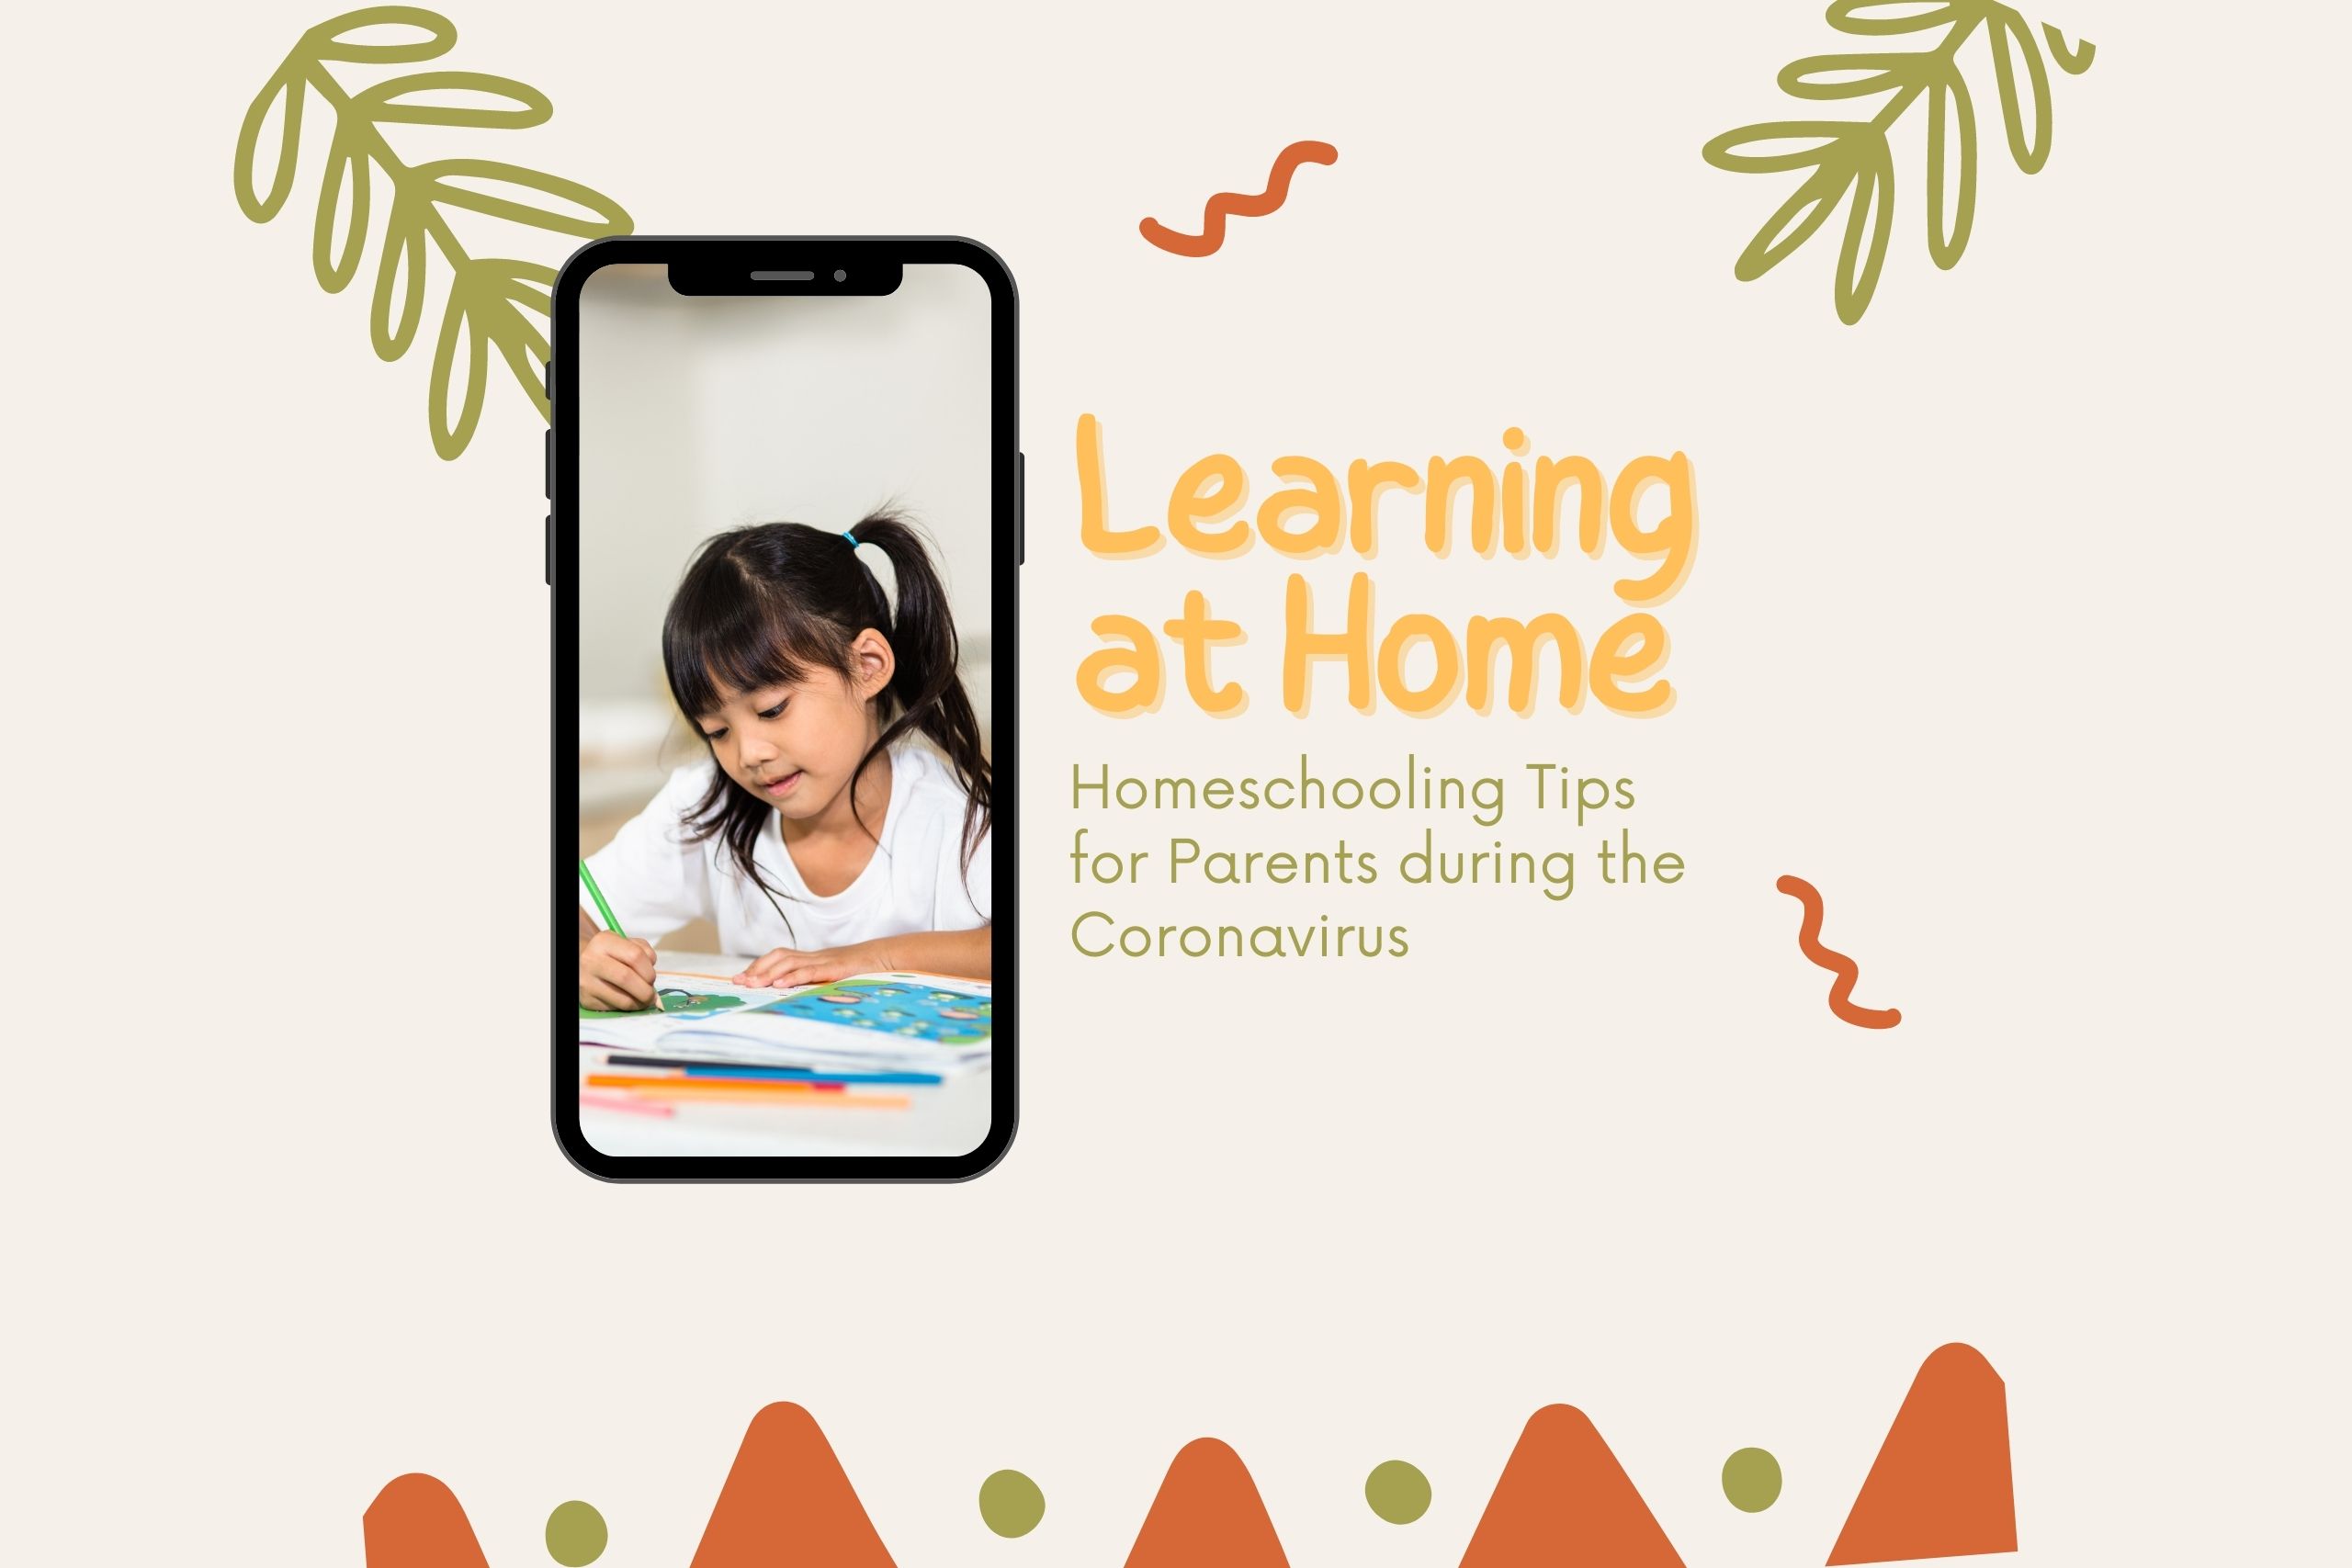 Homeschooling Tips for Parents during the Coronavirus (2560 × 1707 px)